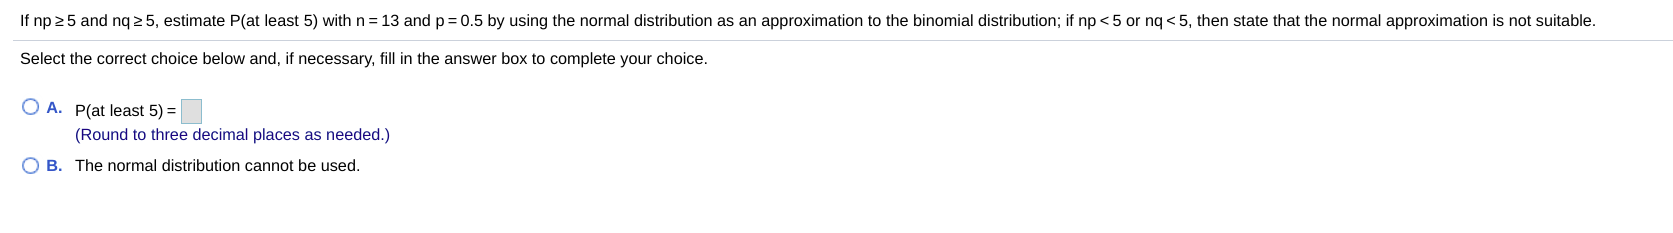 If np 25 and nq 2 5, estimate P(at least 5) with n= 13 and p=0.5 by using the normal distribution as an approximation to the binomial distribution; if np <5 or ng < 5, then state that the normal approximation is not suitable.
Select the correct choice below and, if necessary, fill in the answer box to complete your choice.
O A. P(at least 5) =
(Round to three decimal places as needed.)
B. The normal distribution cannot be used.
